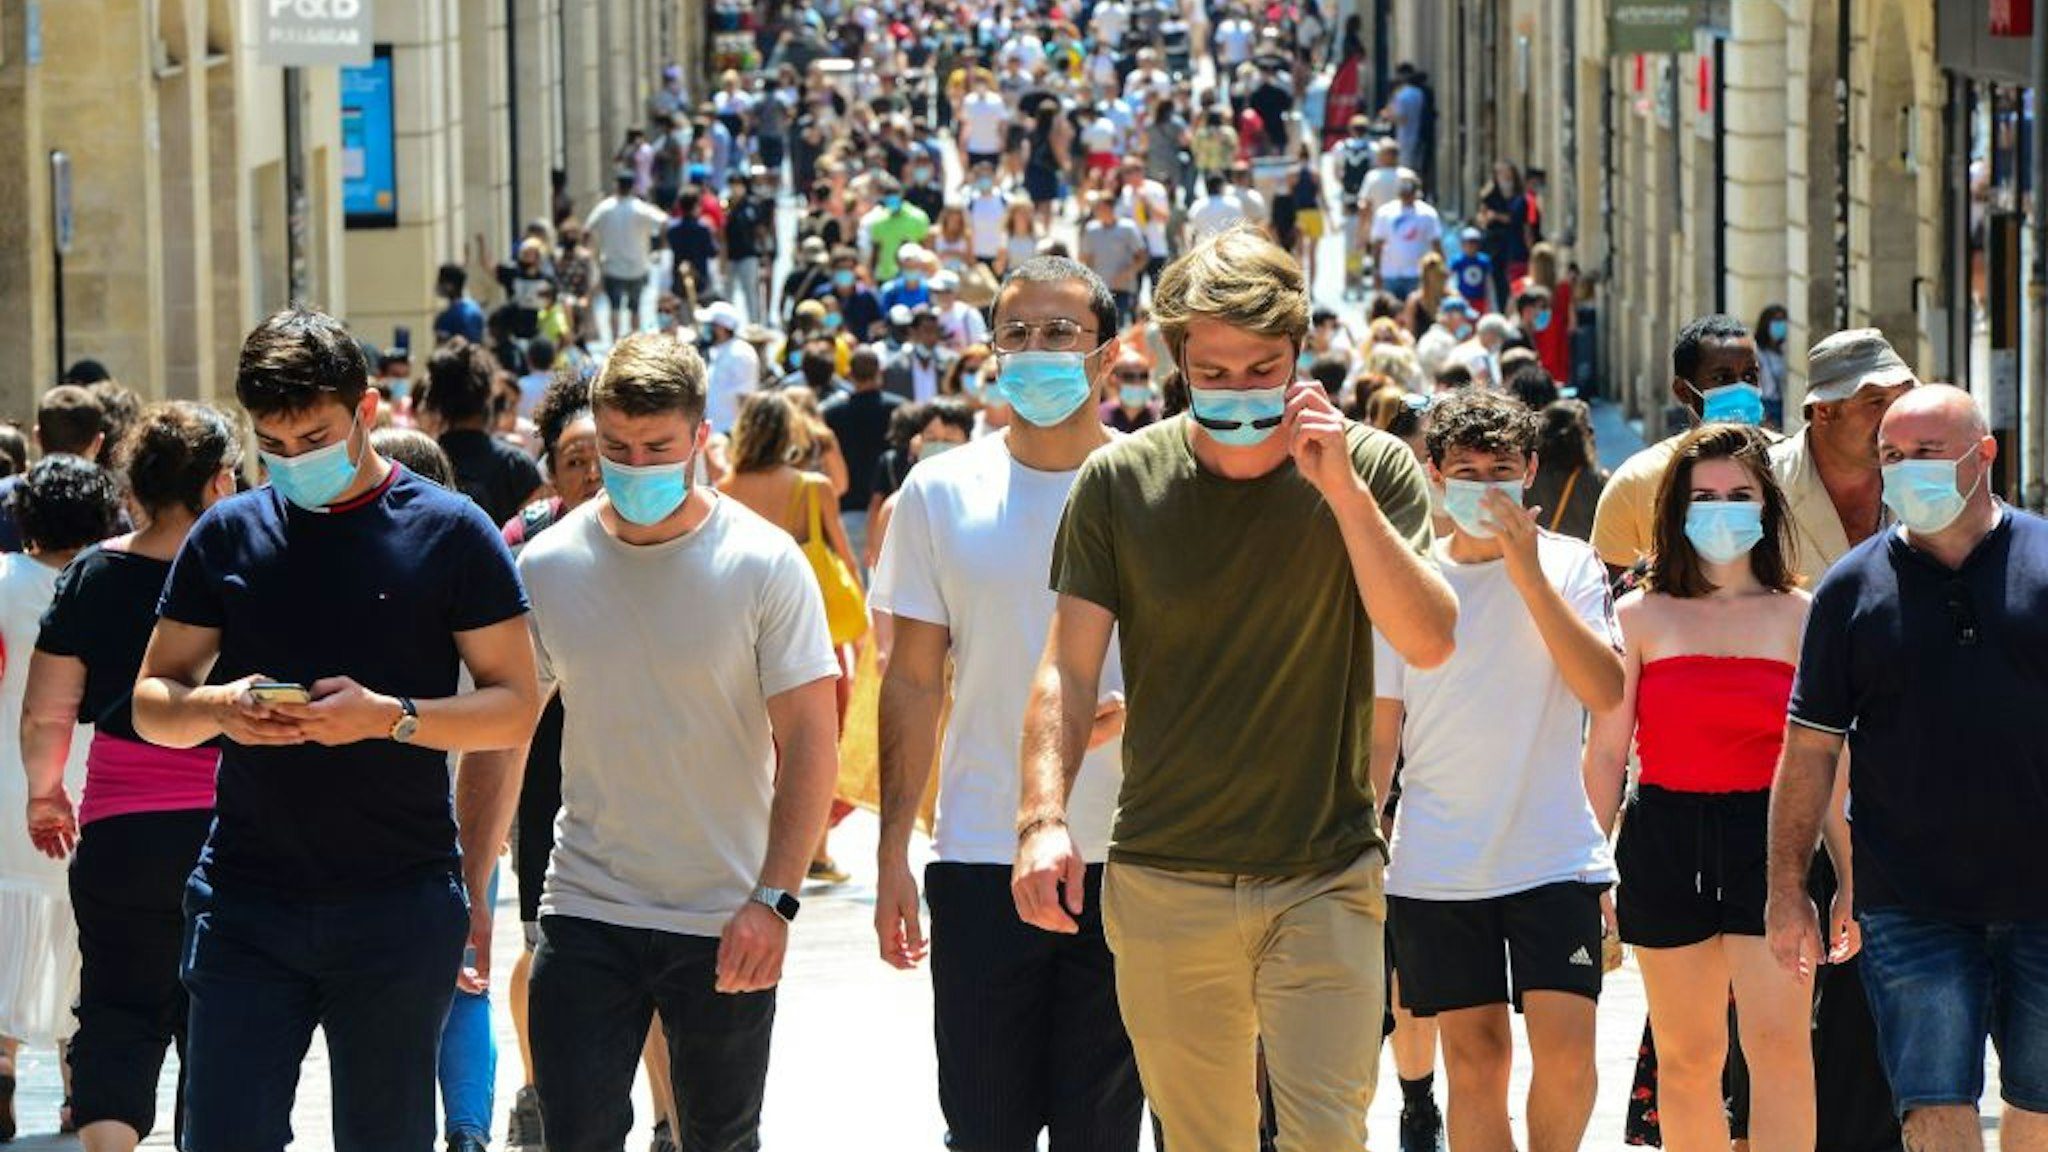 TOPSHOT - People stroll down Bordeaux's main shopping street Sainte-Catherine, where wearing a mask is compulsory as of August 15, 2020, to prevent the spread of the novel coronavirus COVID-19. - The fine for non-compliance with wearing a mask is 135 euros. The Mayor of the southwestern city of Bordeaux Pierre Hurmic, has made it compulsory to wear a mask in Sainte-Catherine and Porte-Dijeaux streets as of from August 15. (Photo by MEHDI FEDOUACH / AFP) (Photo by MEHDI FEDOUACH/AFP via Getty Images)